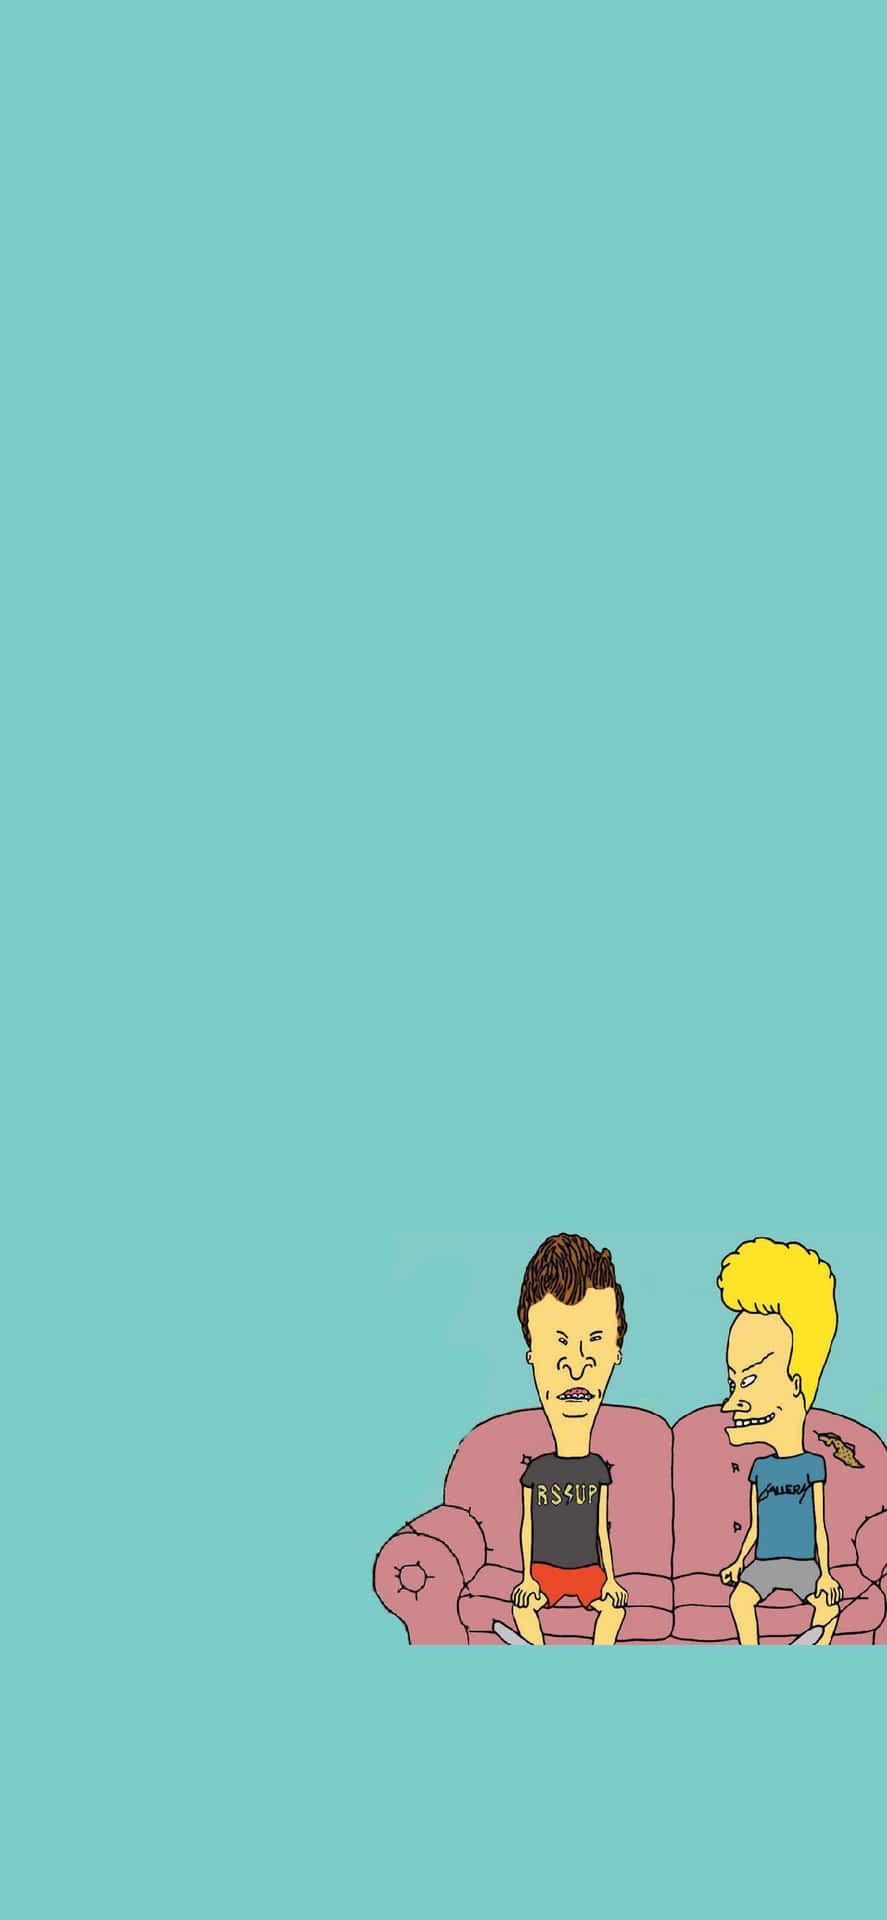 Beavis And Butthead Out To Create Some Mischief